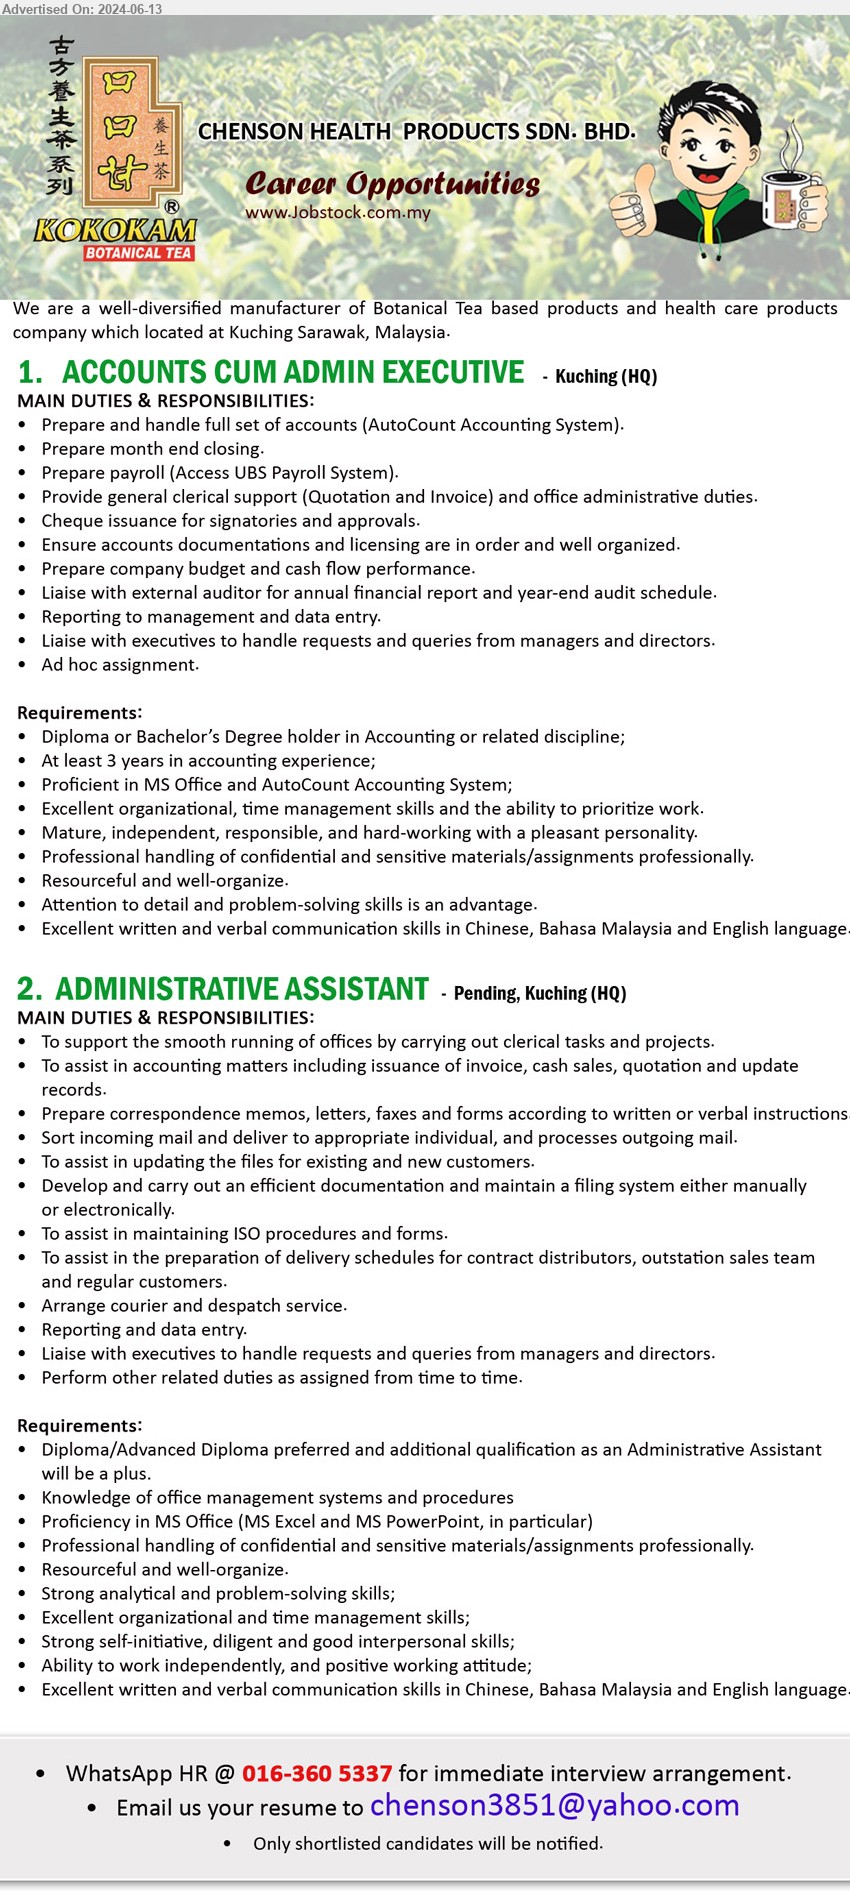 CHENSON HEALTH PRODUCTS SDN BHD - 1. ACCOUNTS CUM ADMIN EXECUTIVE (Kuching), Diploma or Bachelor’s Degree holder in Accounting, 3 yrs. exp.,...
2. ADMINISTRATIVE ASSISTANT (Kuching), Diploma/Advanced Diploma preferred, Knowledge of office management systems and procedures, Proficiency in MS Office (MS Excel and MS PowerPoint, in particular),...
WhatsApp HR @ 016-360 5337 / Email resume to ...
